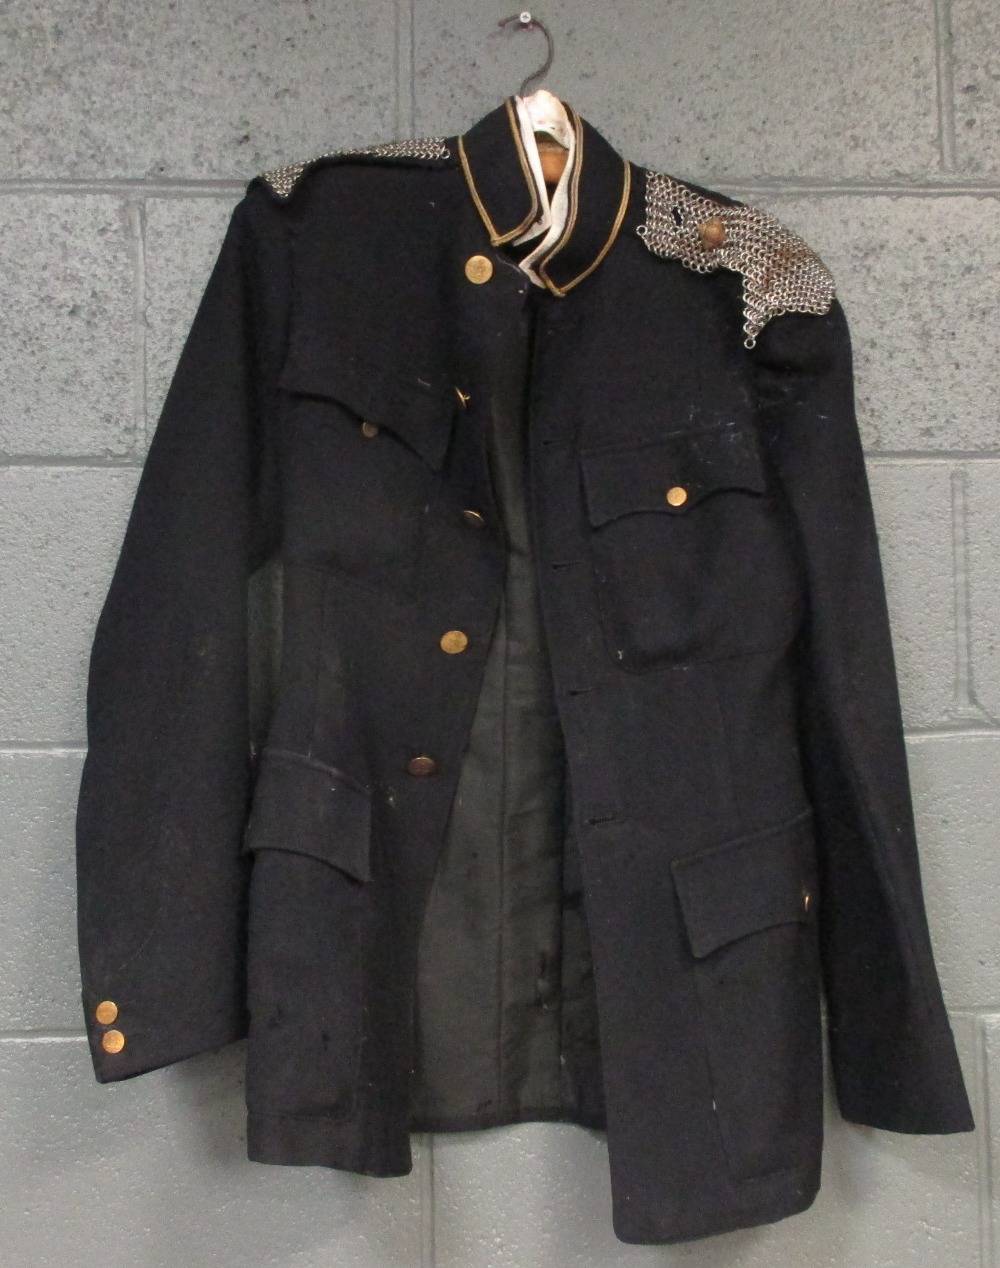 A 19th century Officer's uniform of the West Devon Yeomanry, buttons etched with a crown over cannon